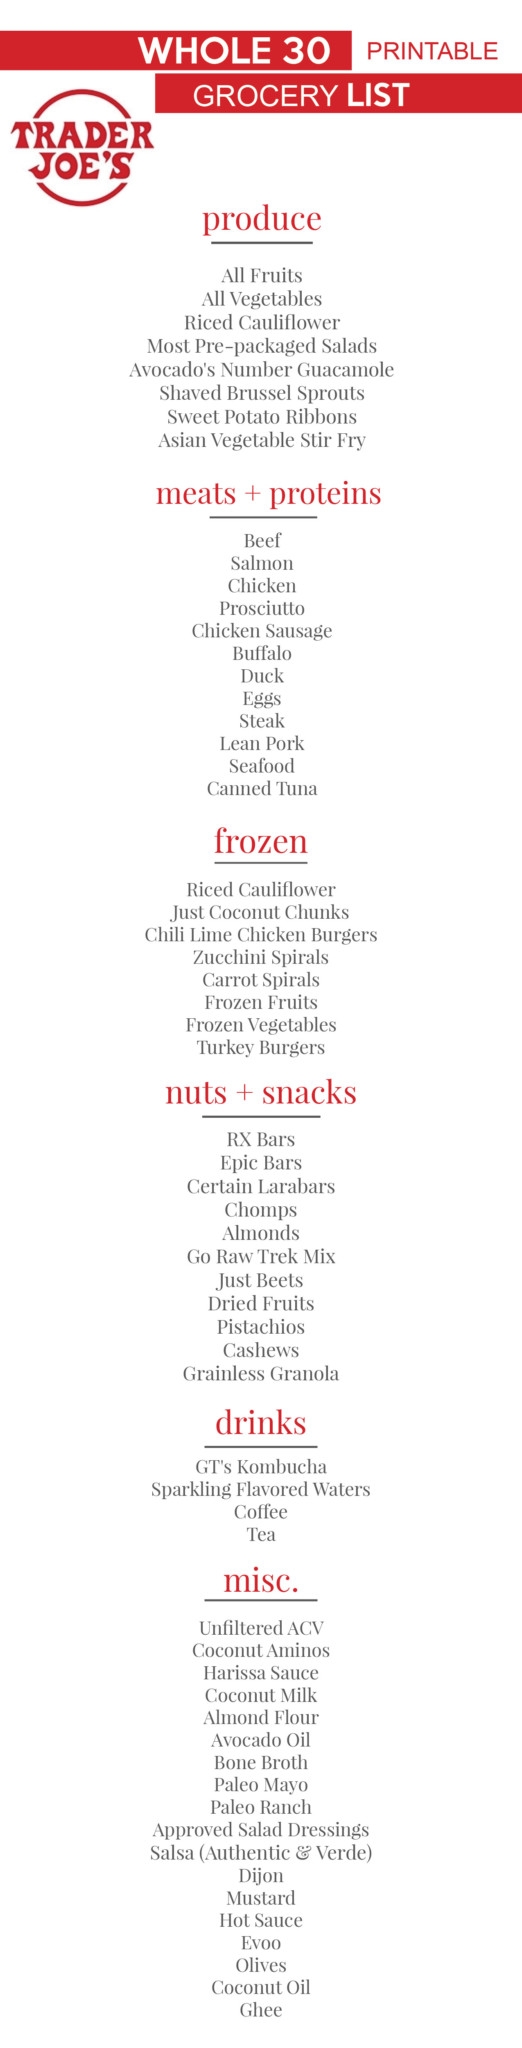 whole30 shopping list // Trader Joe's Whole30 shopping list // healthy grocery list from Alabama blogger Heather of MyLifeWellLoved.com - Trader Joe's Whole30 Shopping List by popular Alabama fitness blogger My Life Well Loved